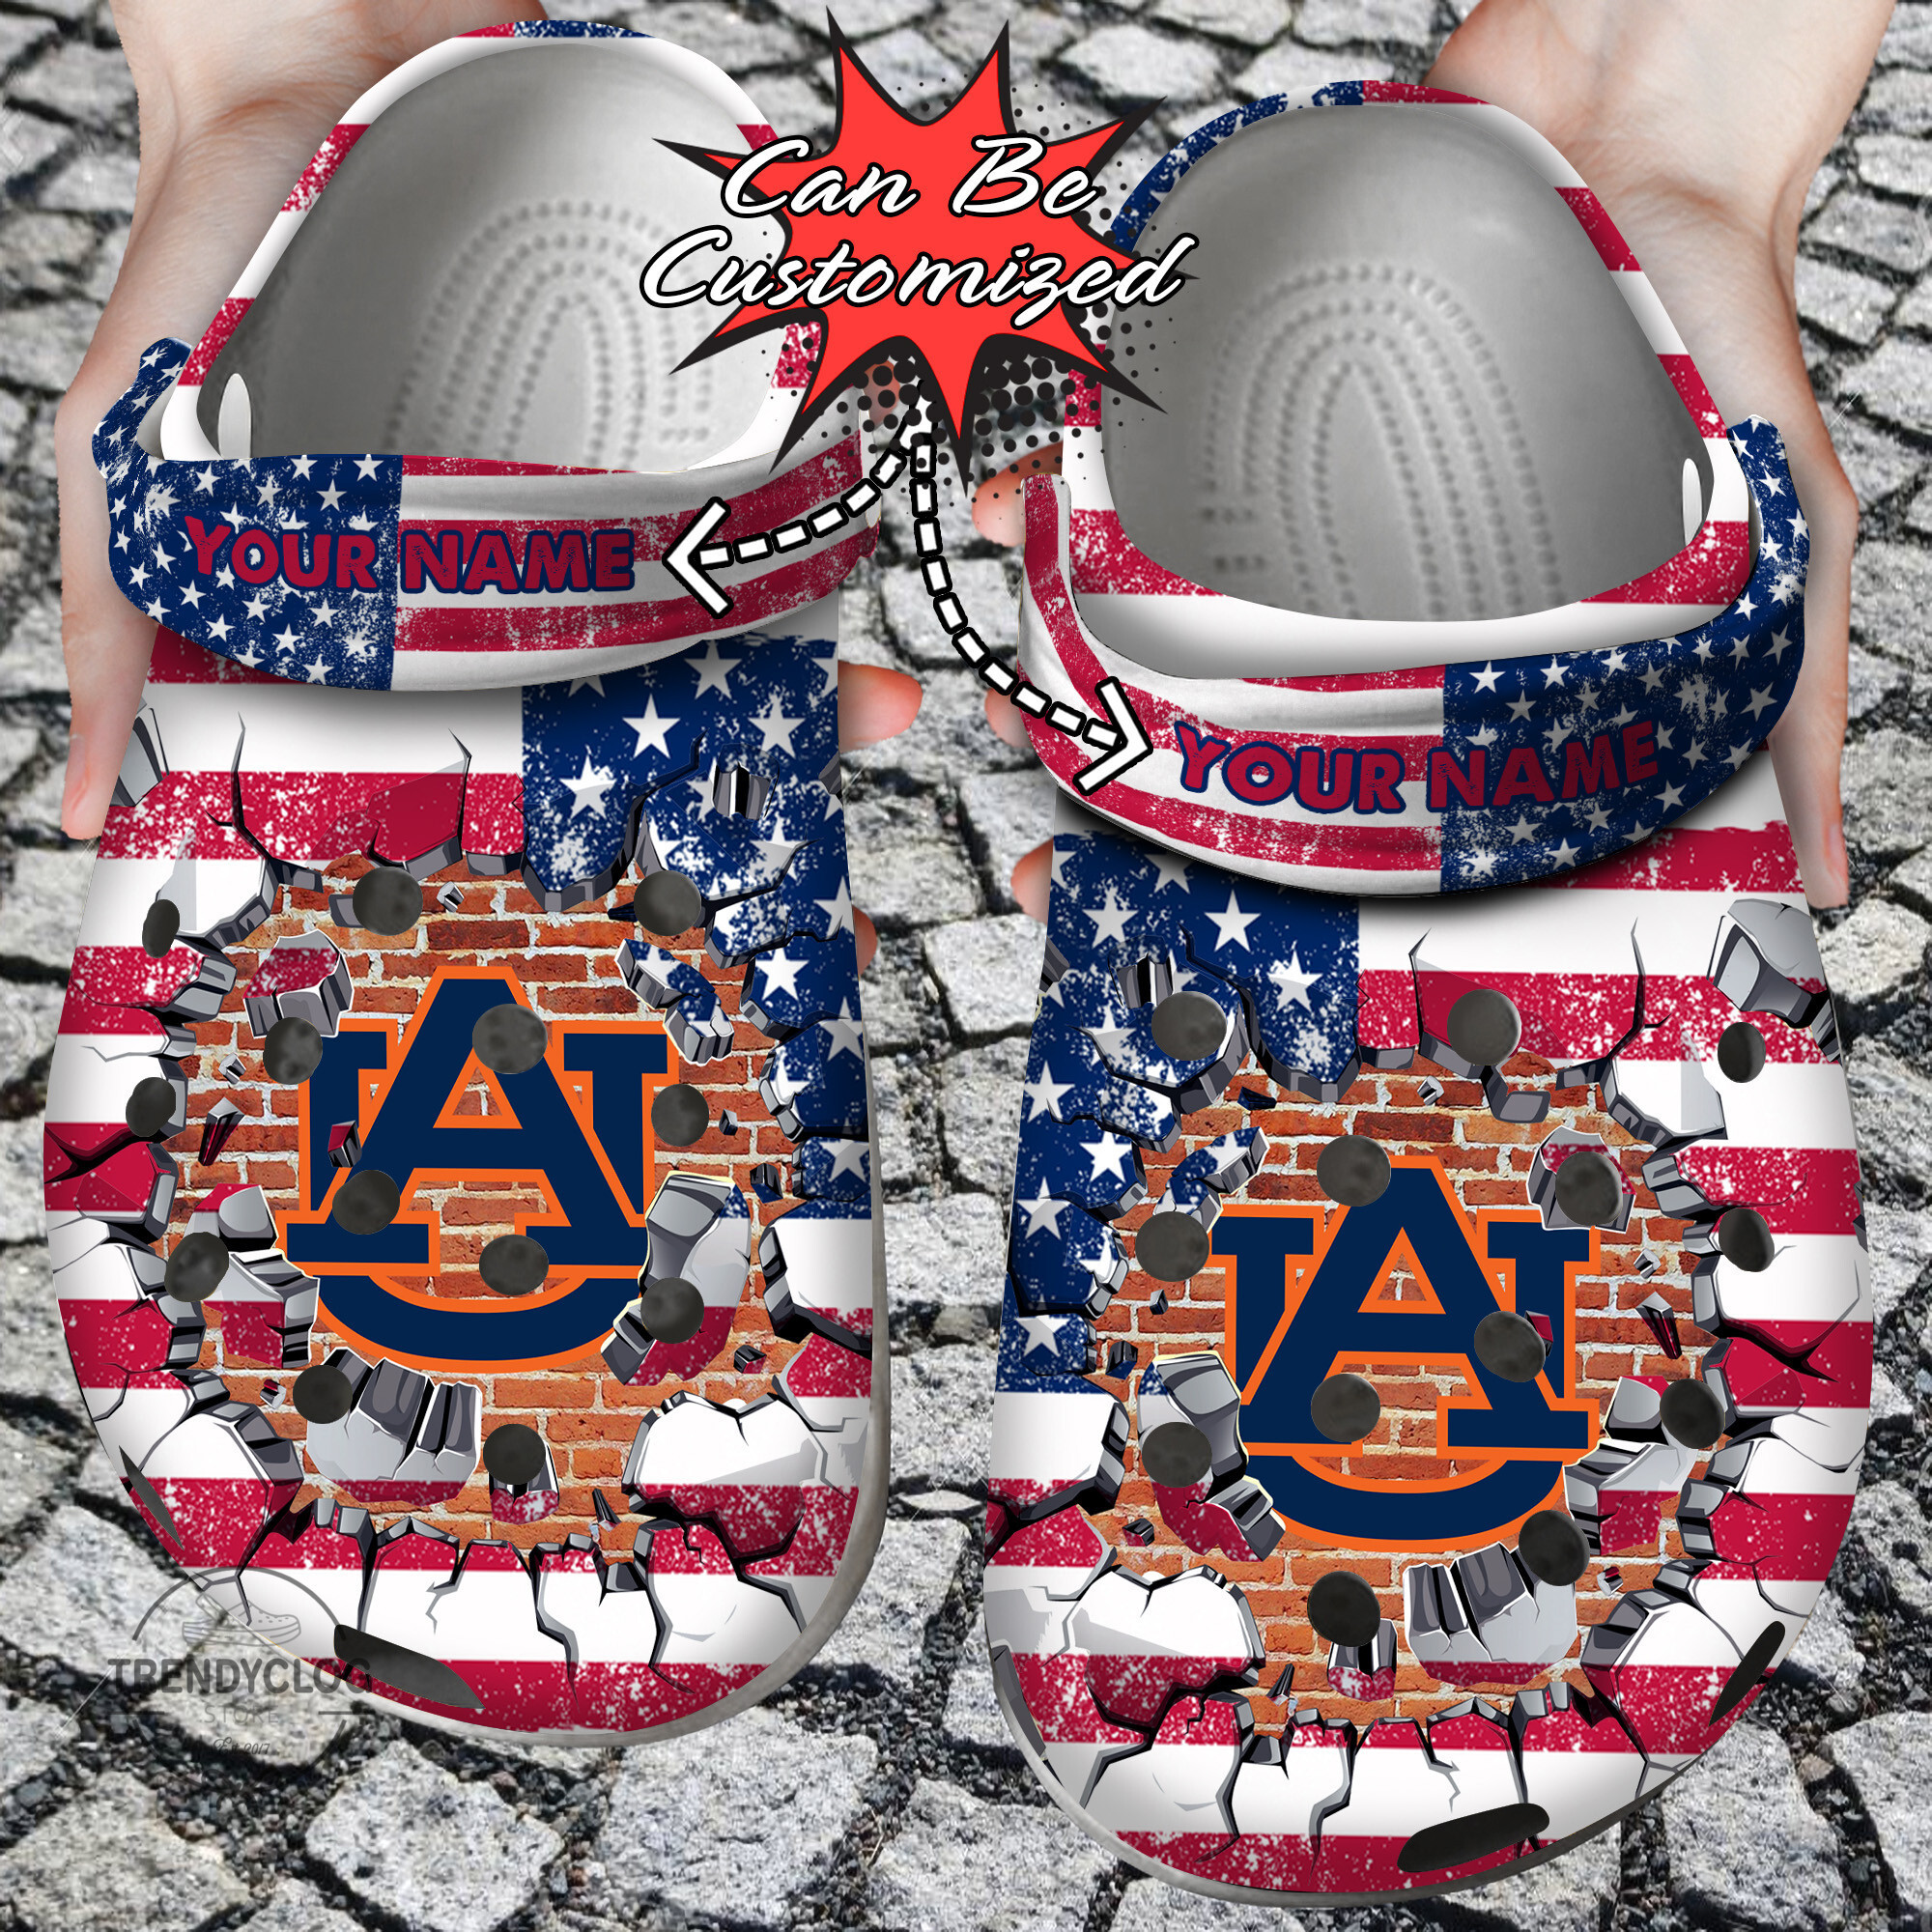 Sport Crocs Personalized ATigers University American Flag New Clog Shoes